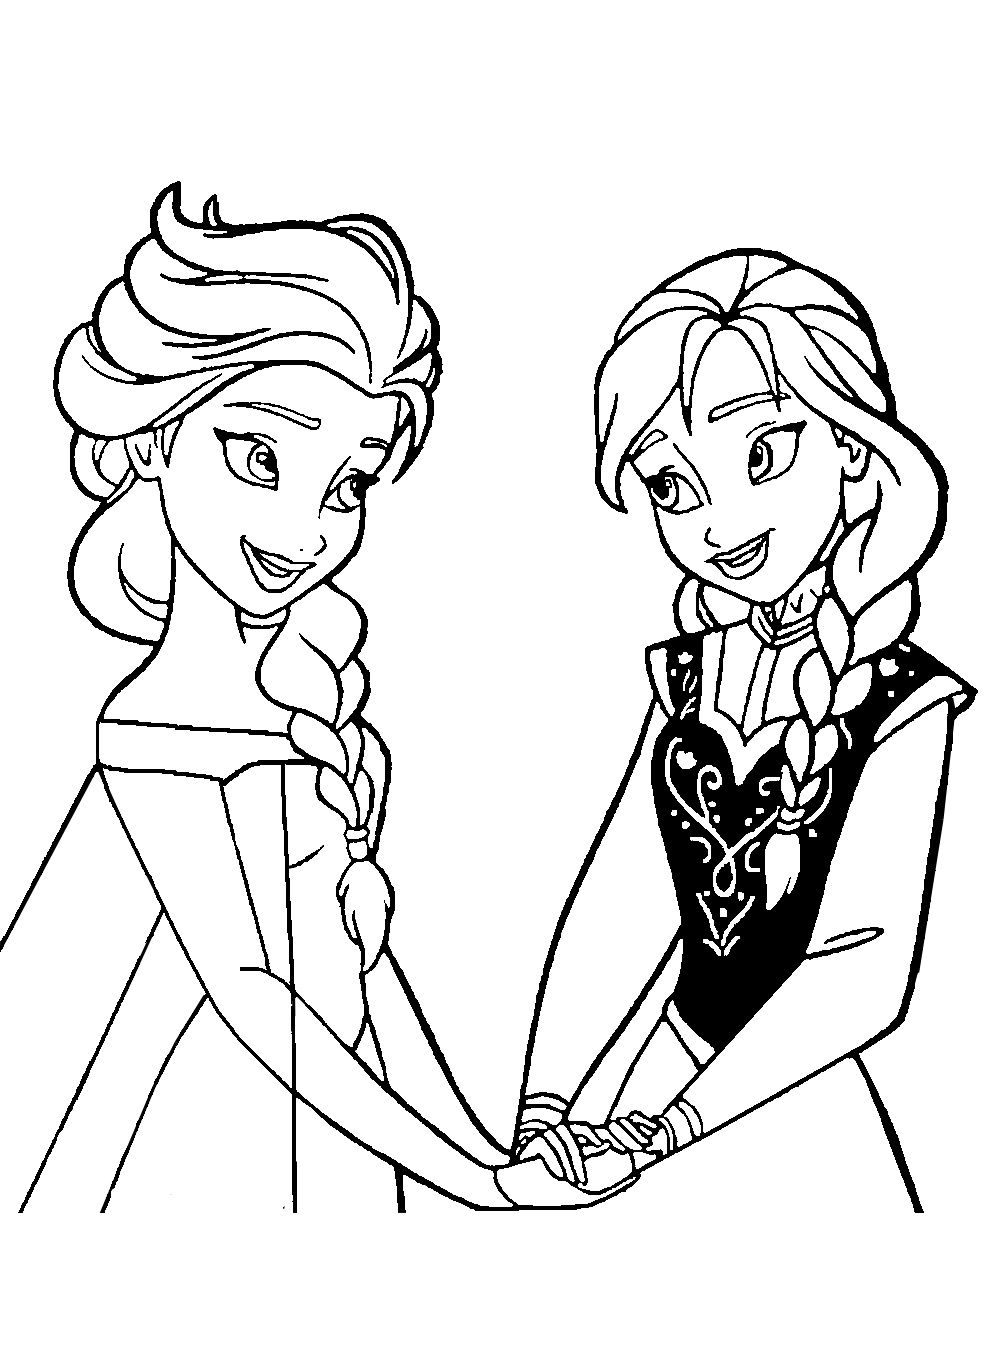 Funny free Frozen coloring page to print and color : Anna & Elsa together, hands in hands